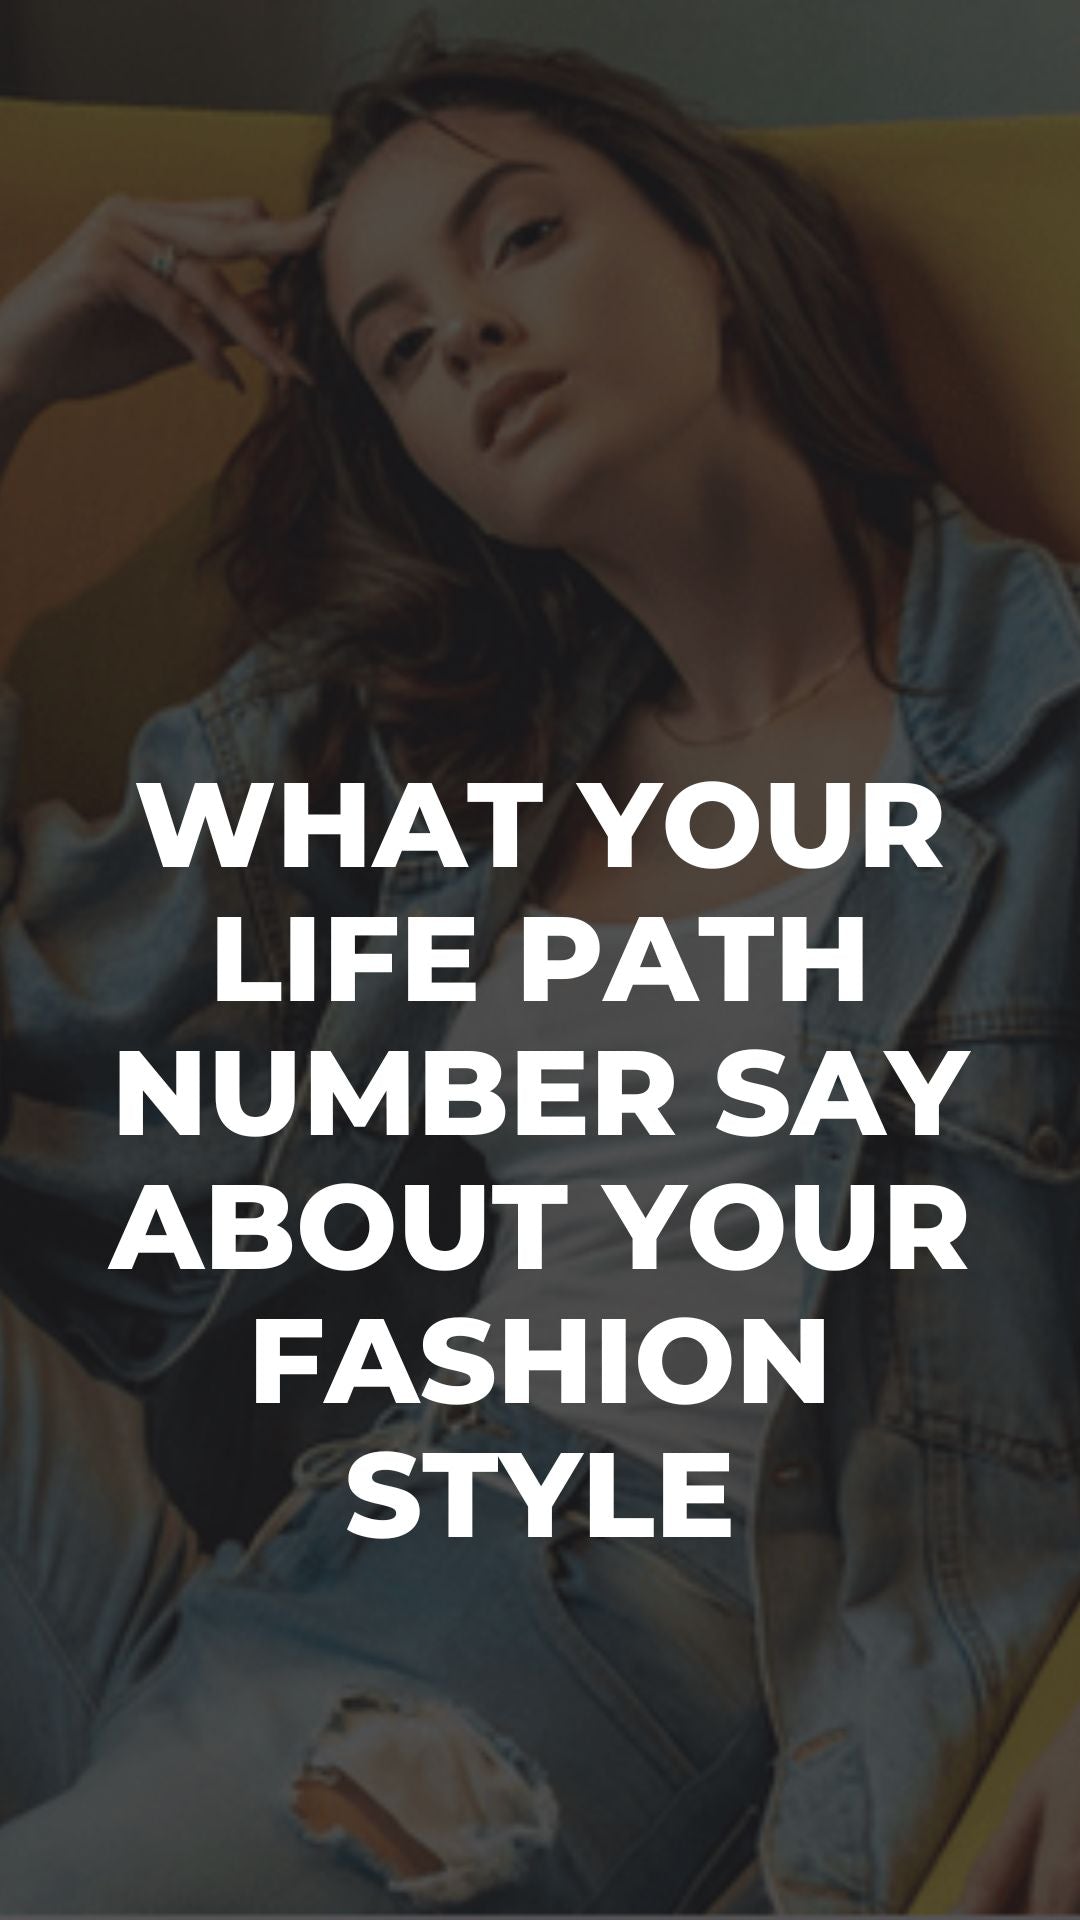 What Your Life Path Number Say About Your Fashion Style